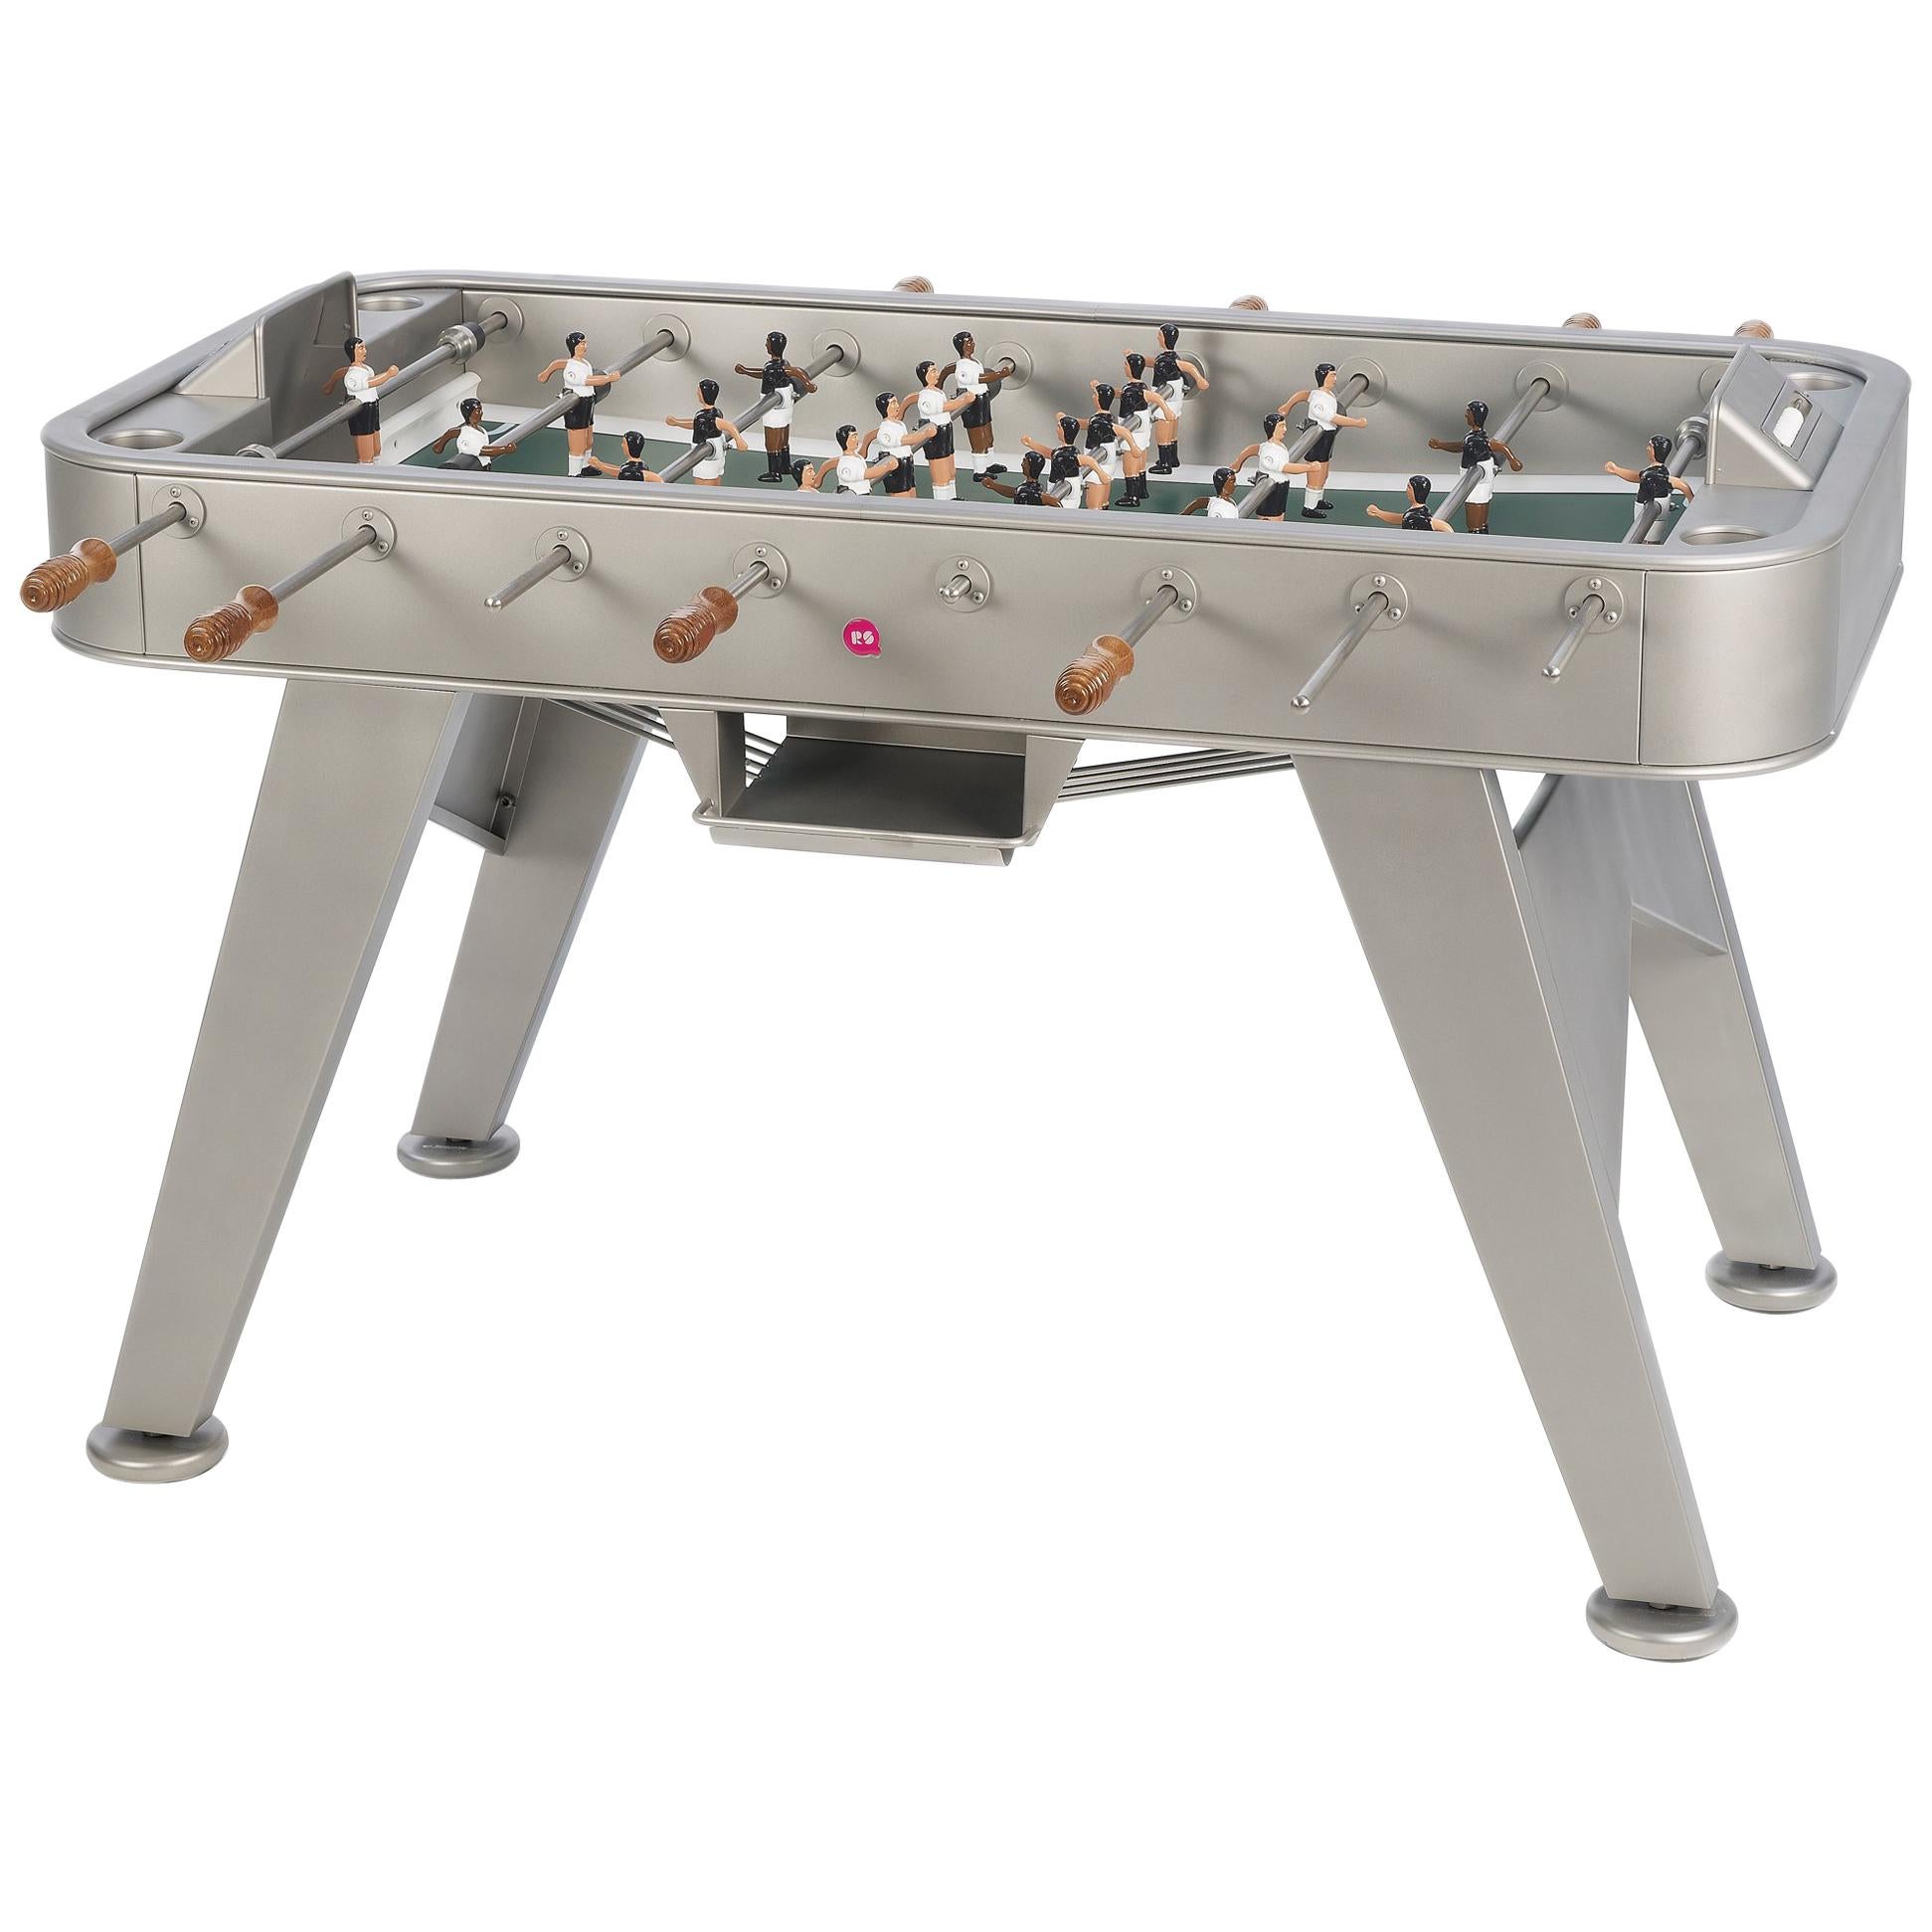 RS Barcelona RS2 Football Table in Stainless Steel by Rafael Rodriguez